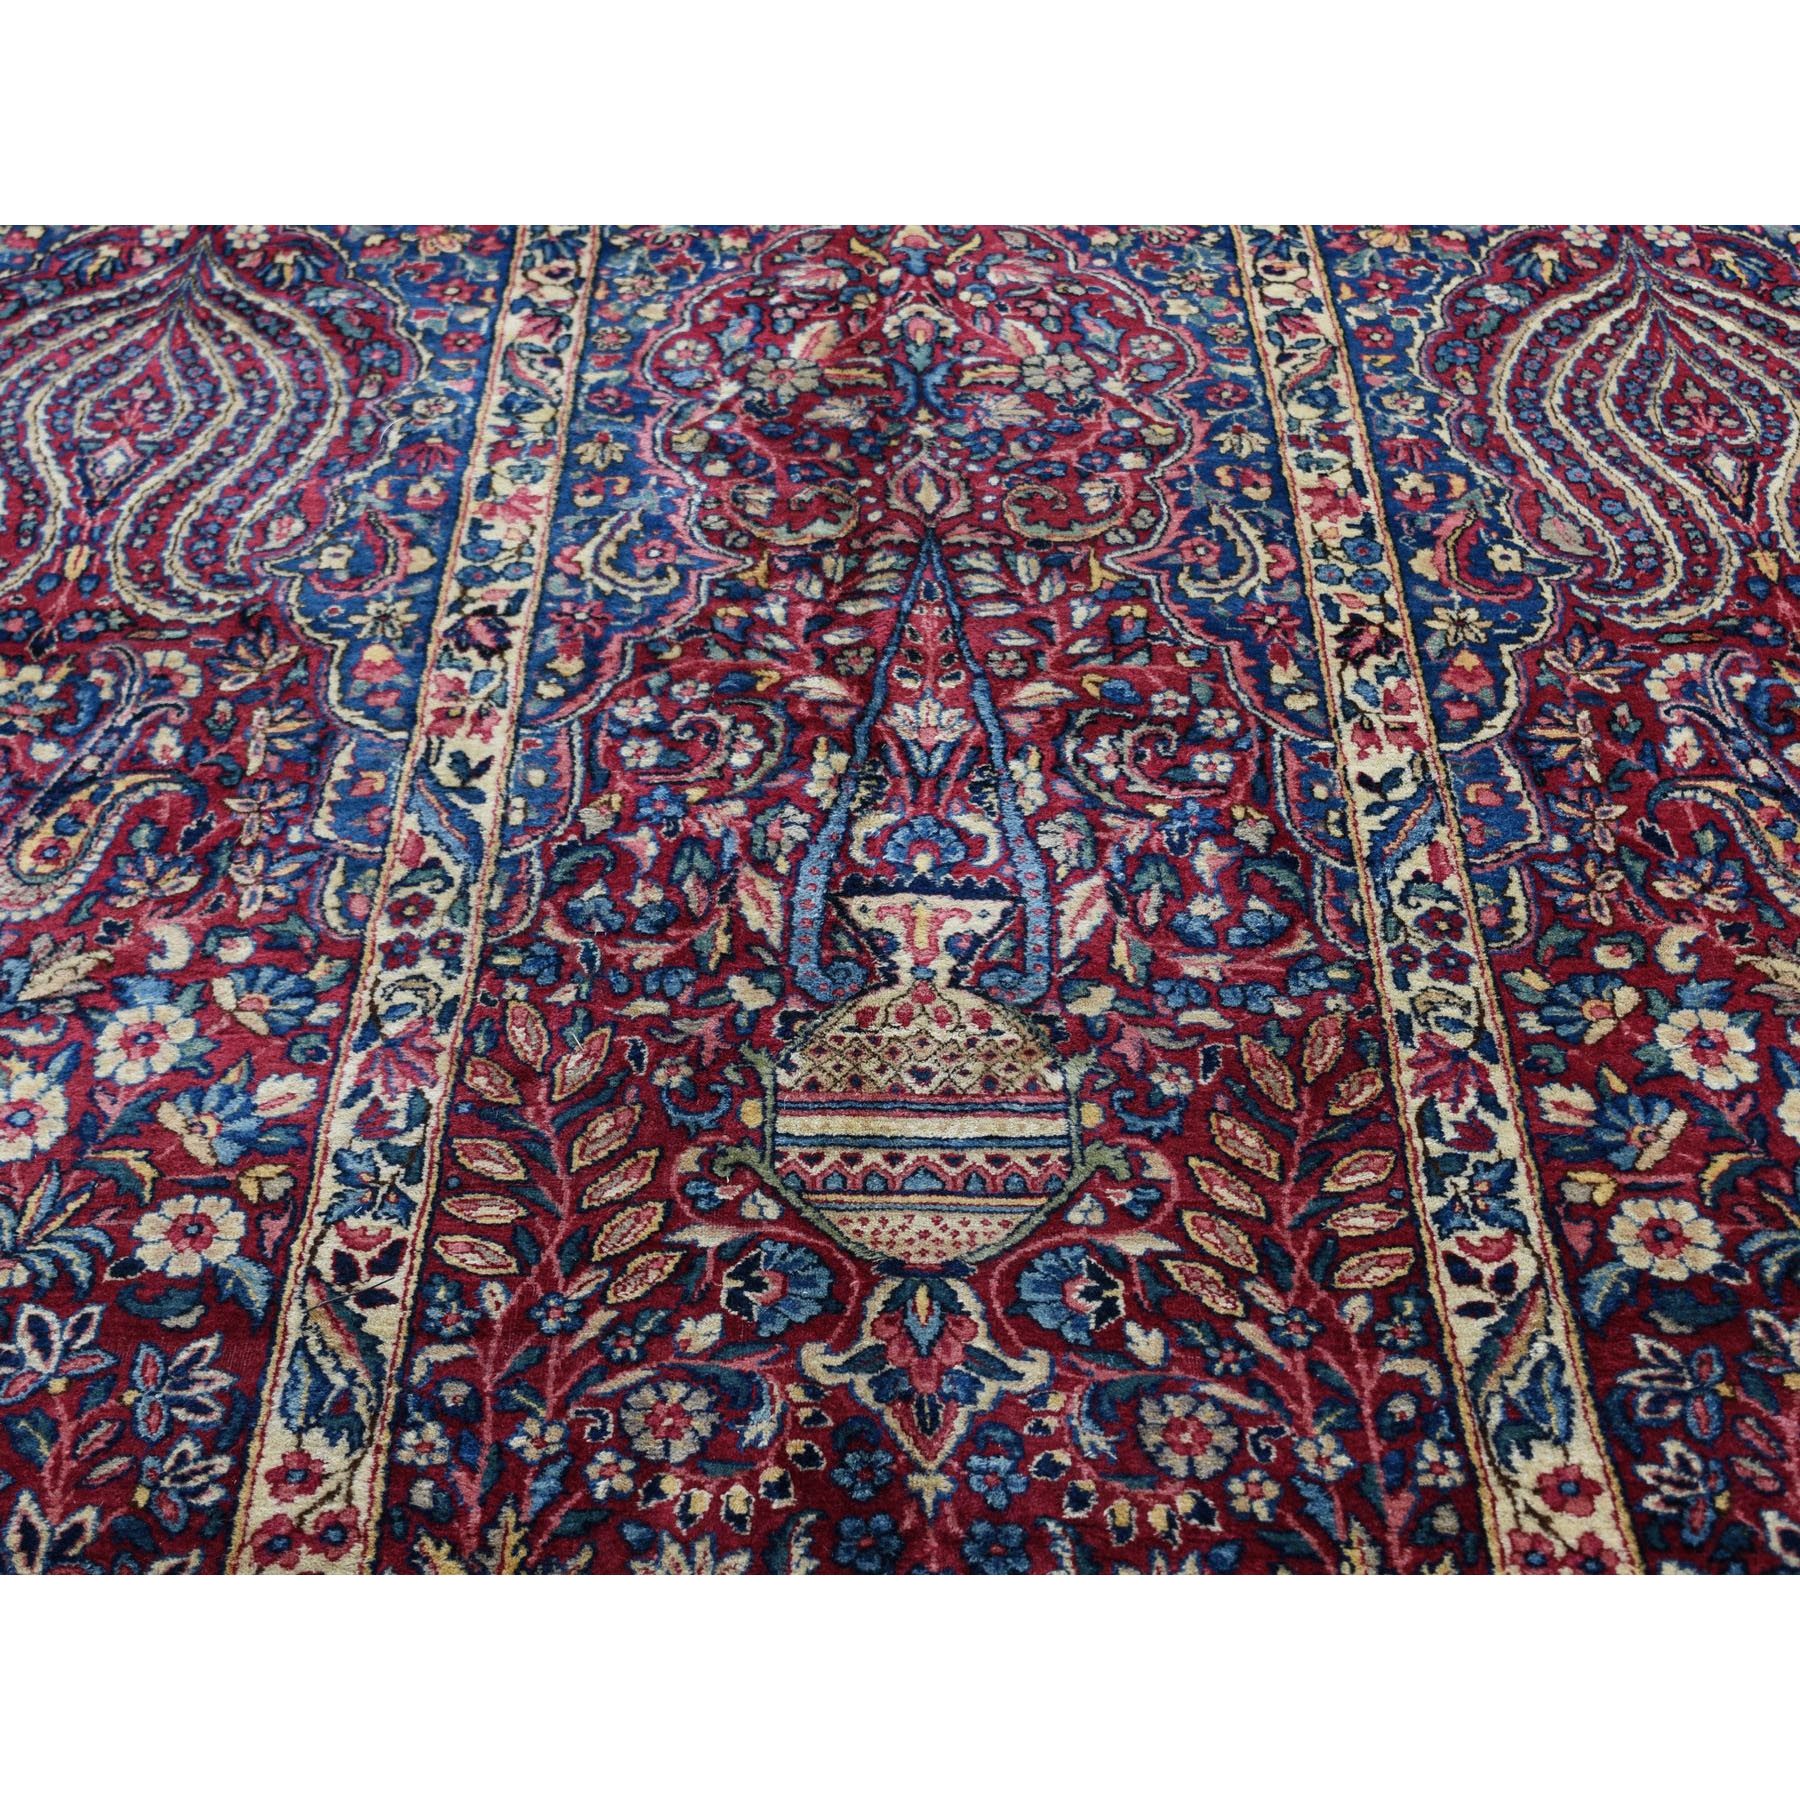 8-9 x19-9  Long And Narrow Red Antique Persian Kerman Full Pile Soft And Clean Hanging Lamps Hand Knotted Oriental Rug 